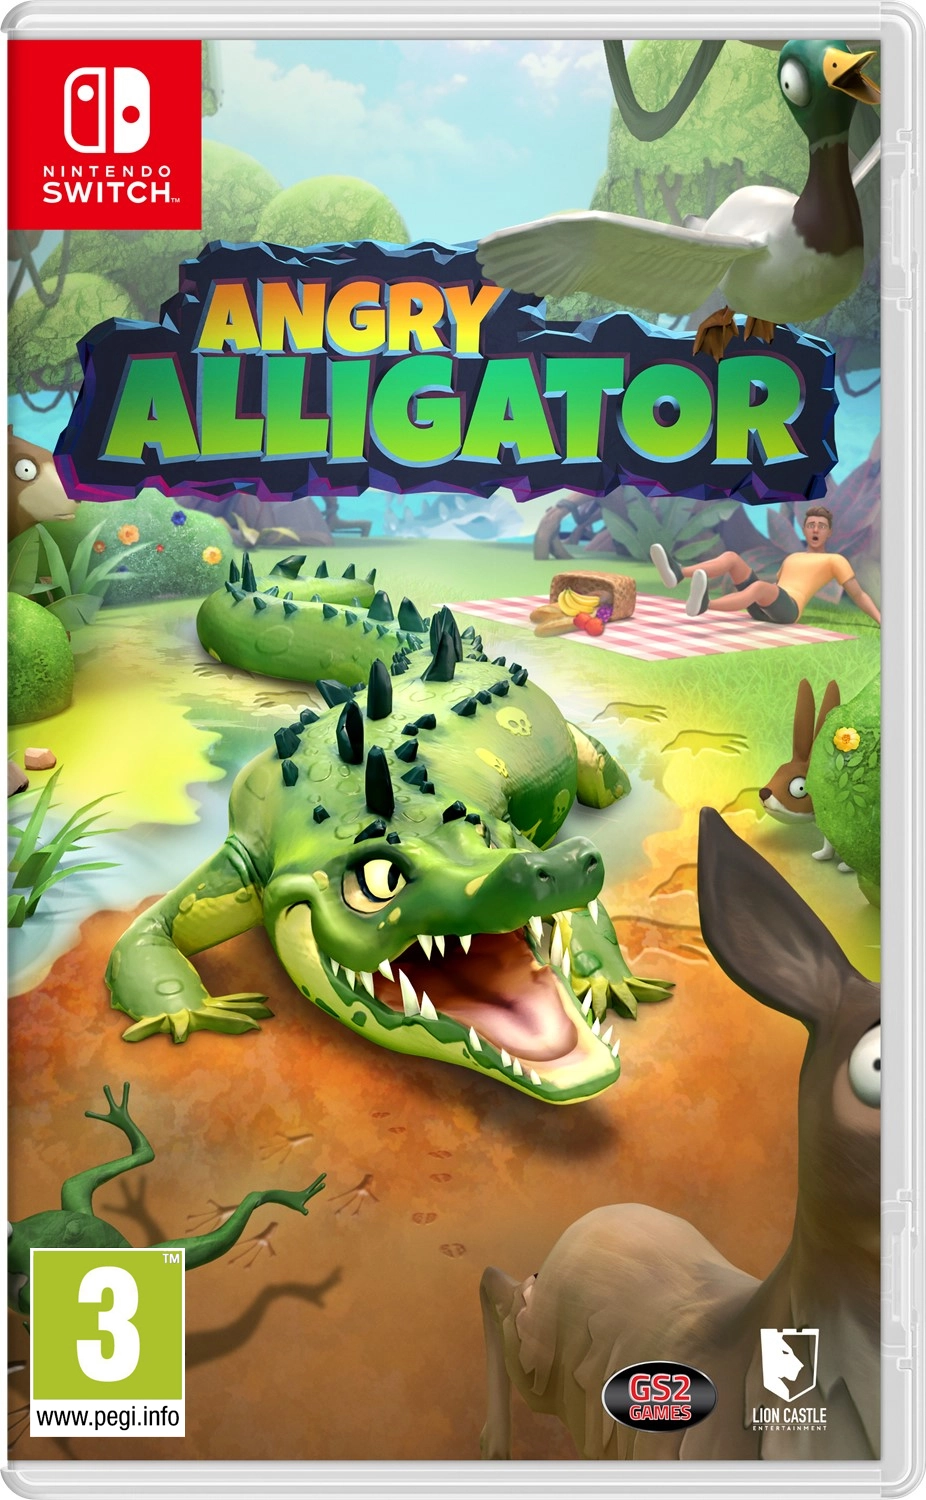 Angry Alligator (Switch), GS2 Games